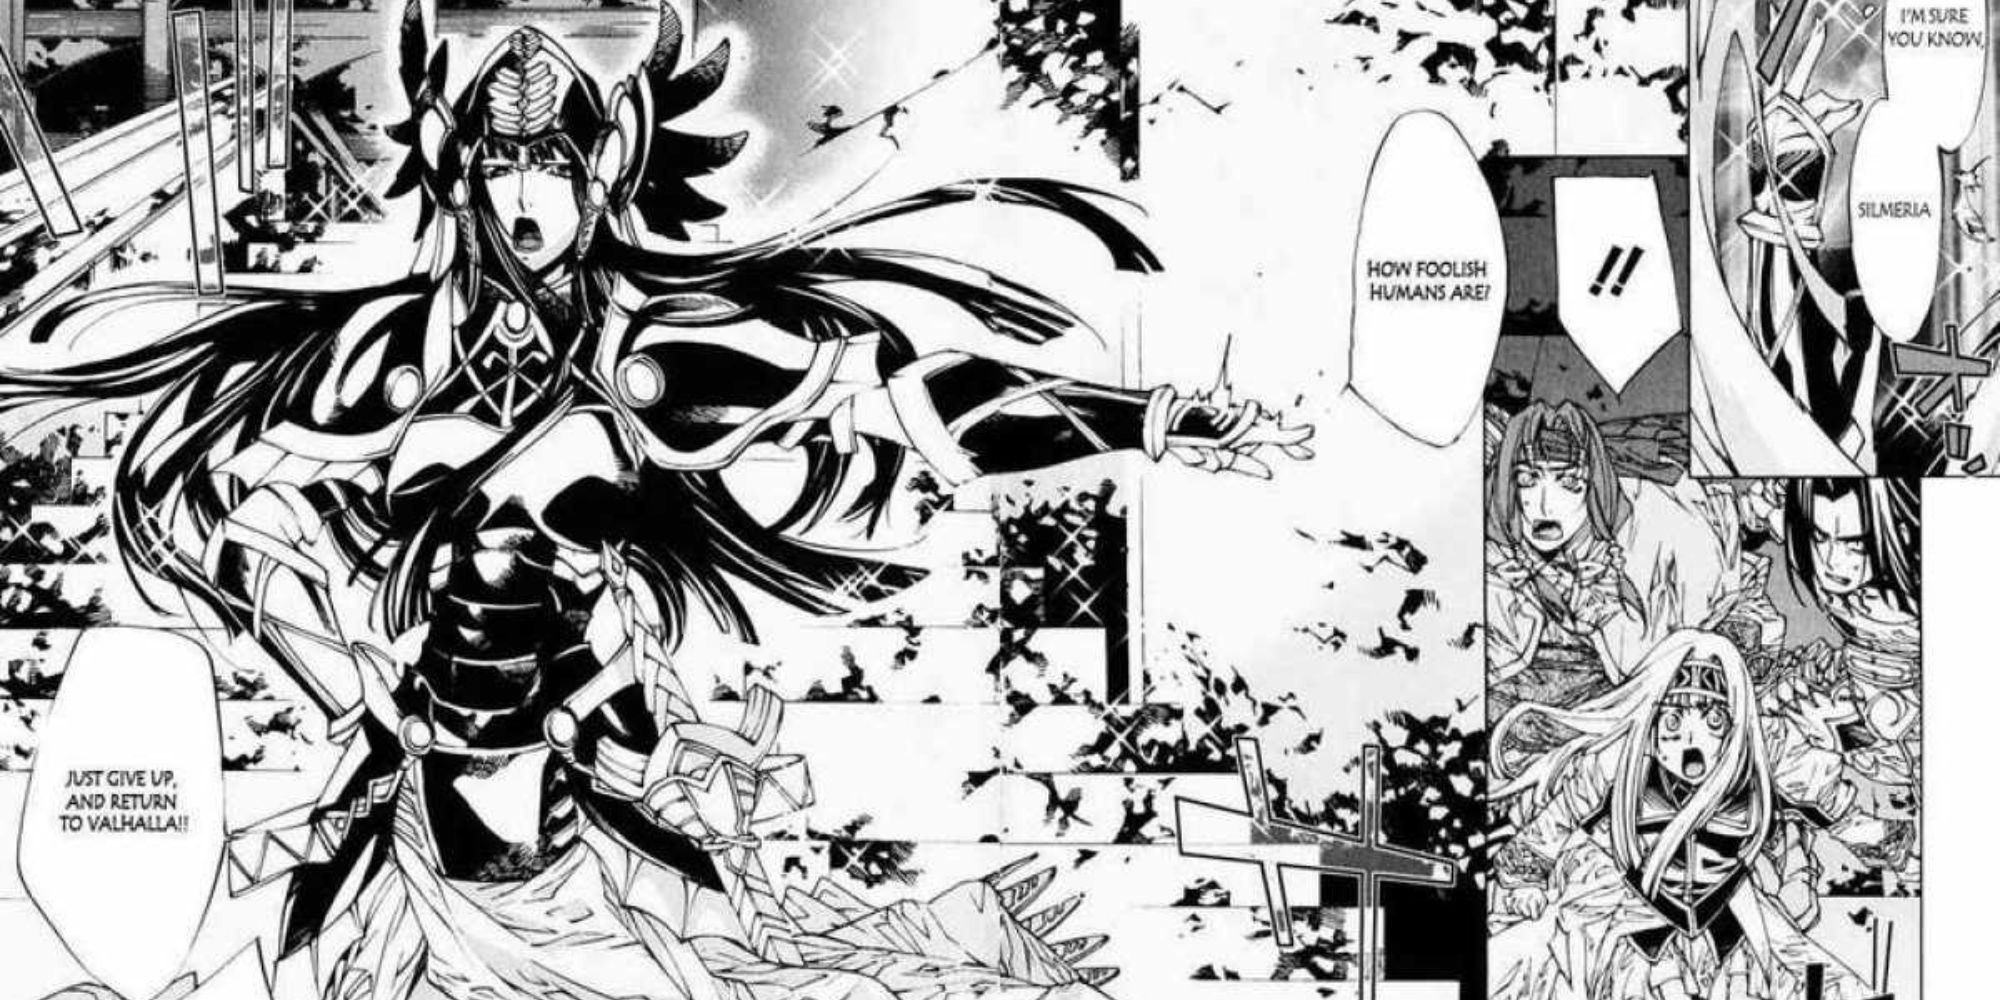 A double page spread of a Valkyrie Profile manga